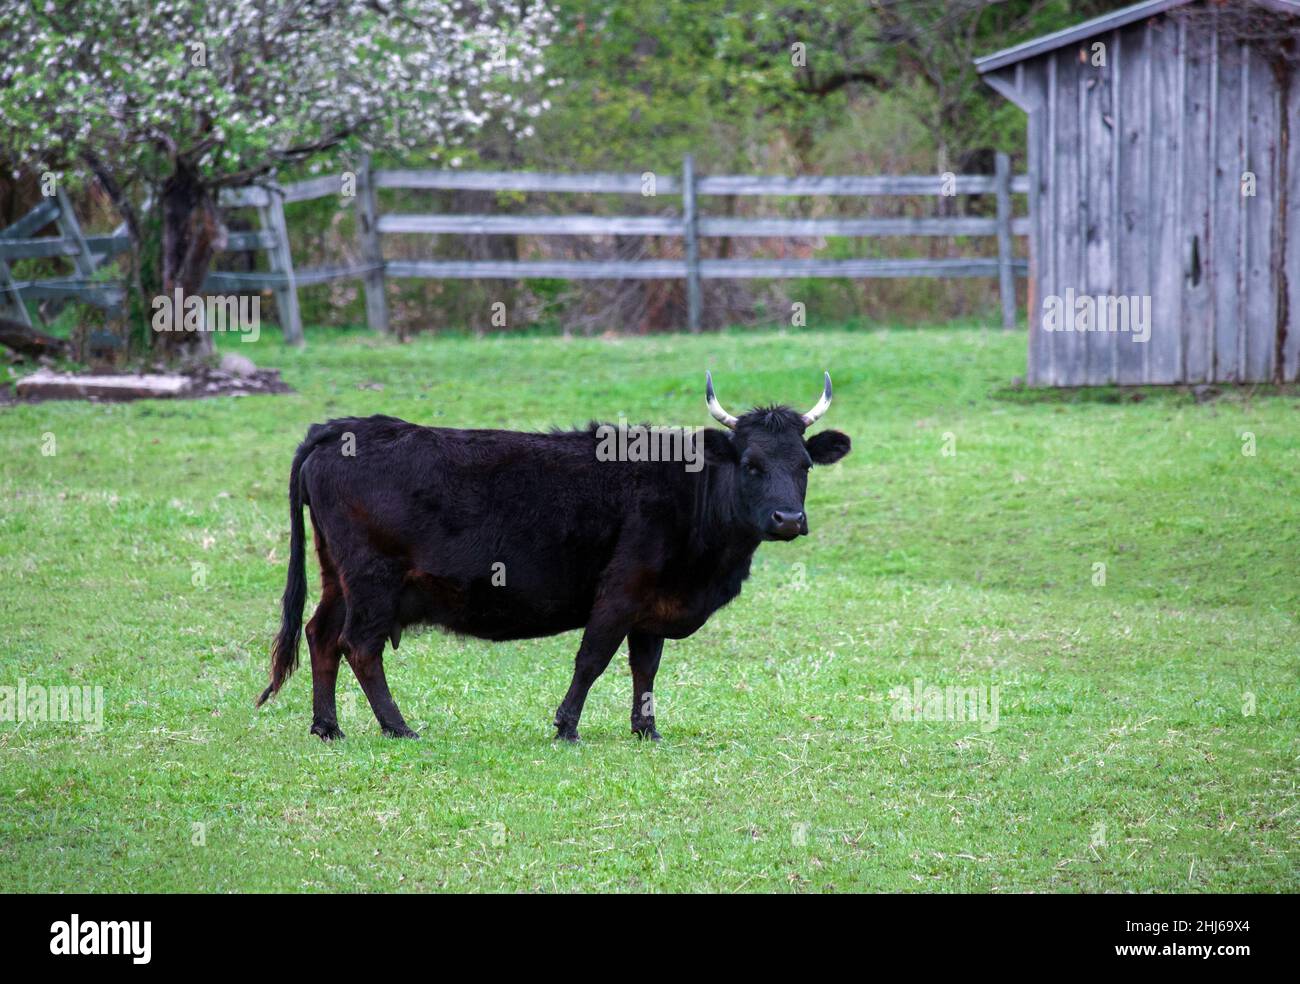 Originating in Ireland the Dexter Cattle is the smallest of all cattle breads. It is triple purpose breed used for milk, beef and as a tractable anima Stock Photo